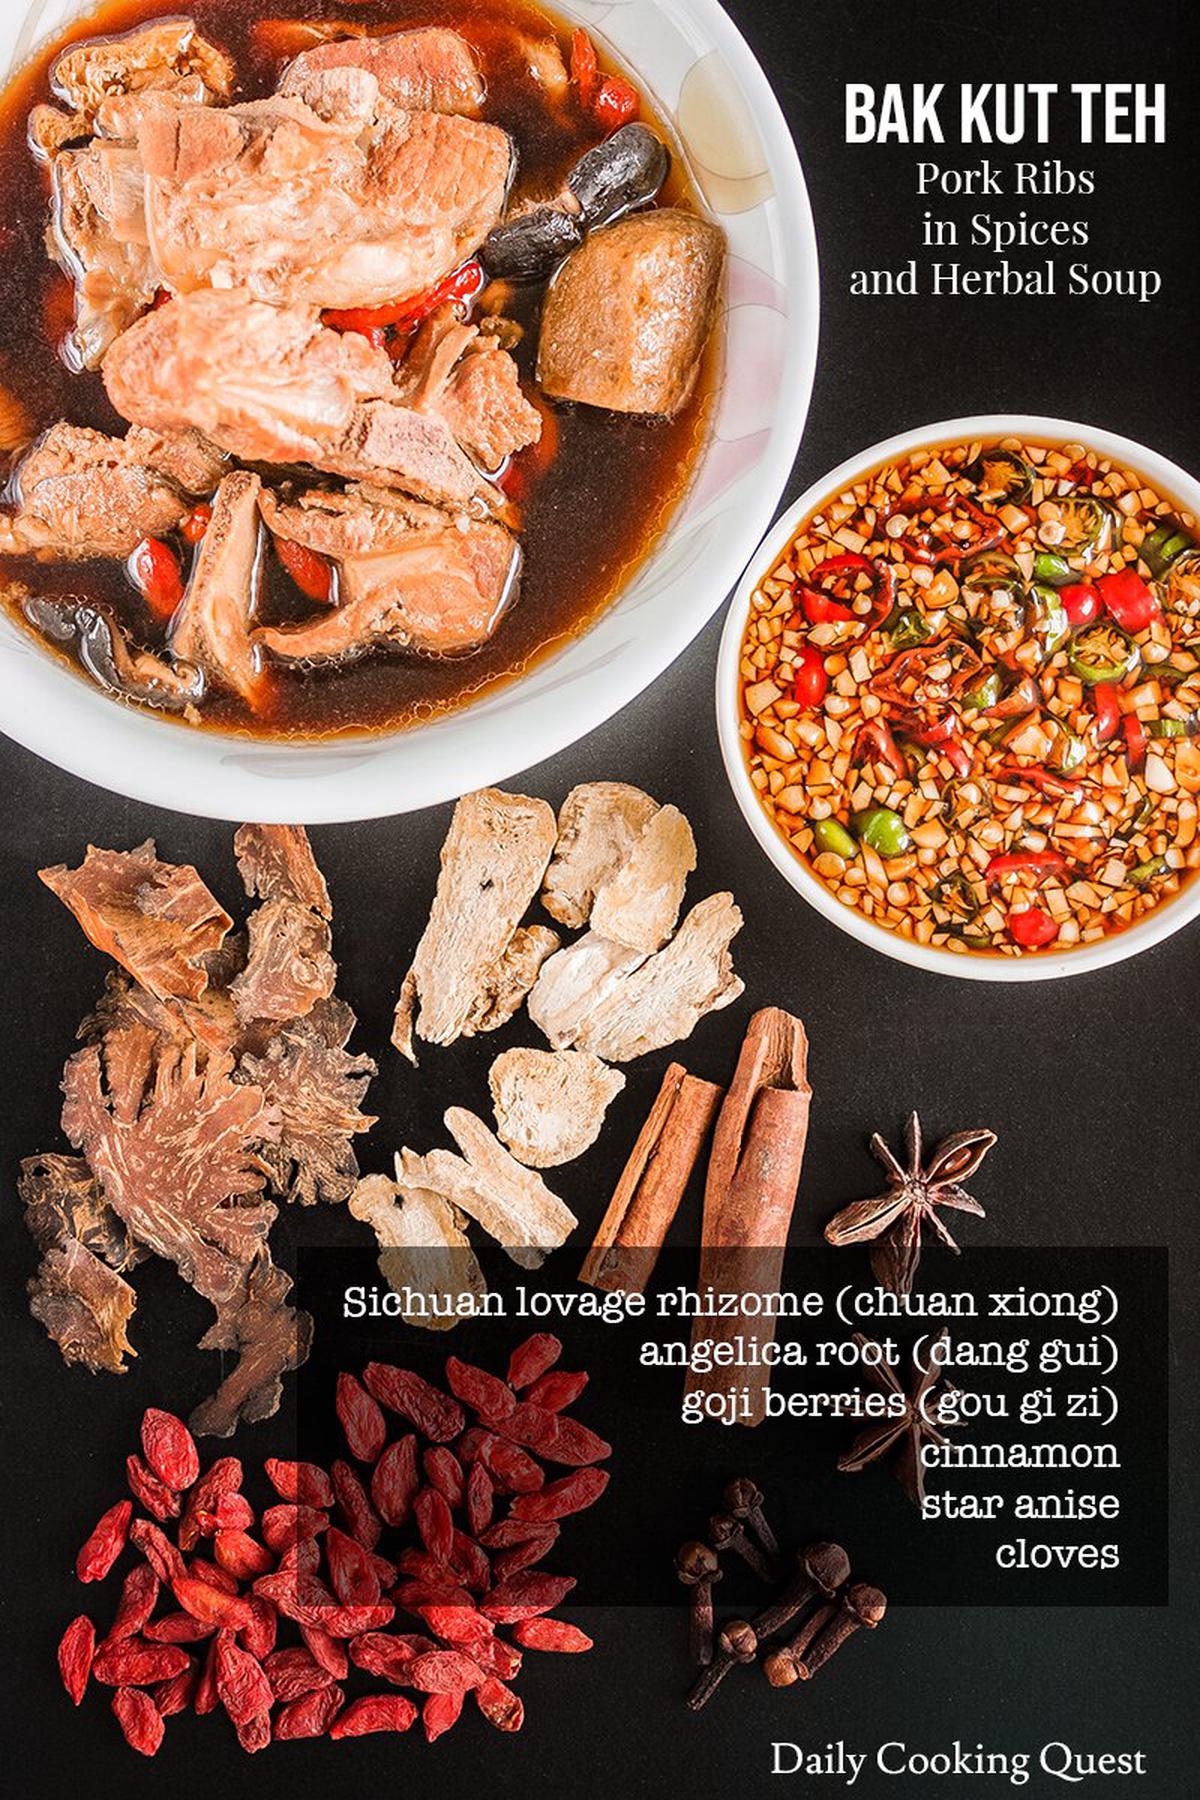 Bak Kut Teh - Pork Ribs in Spices and Herbal Soup Recipe | Daily ...